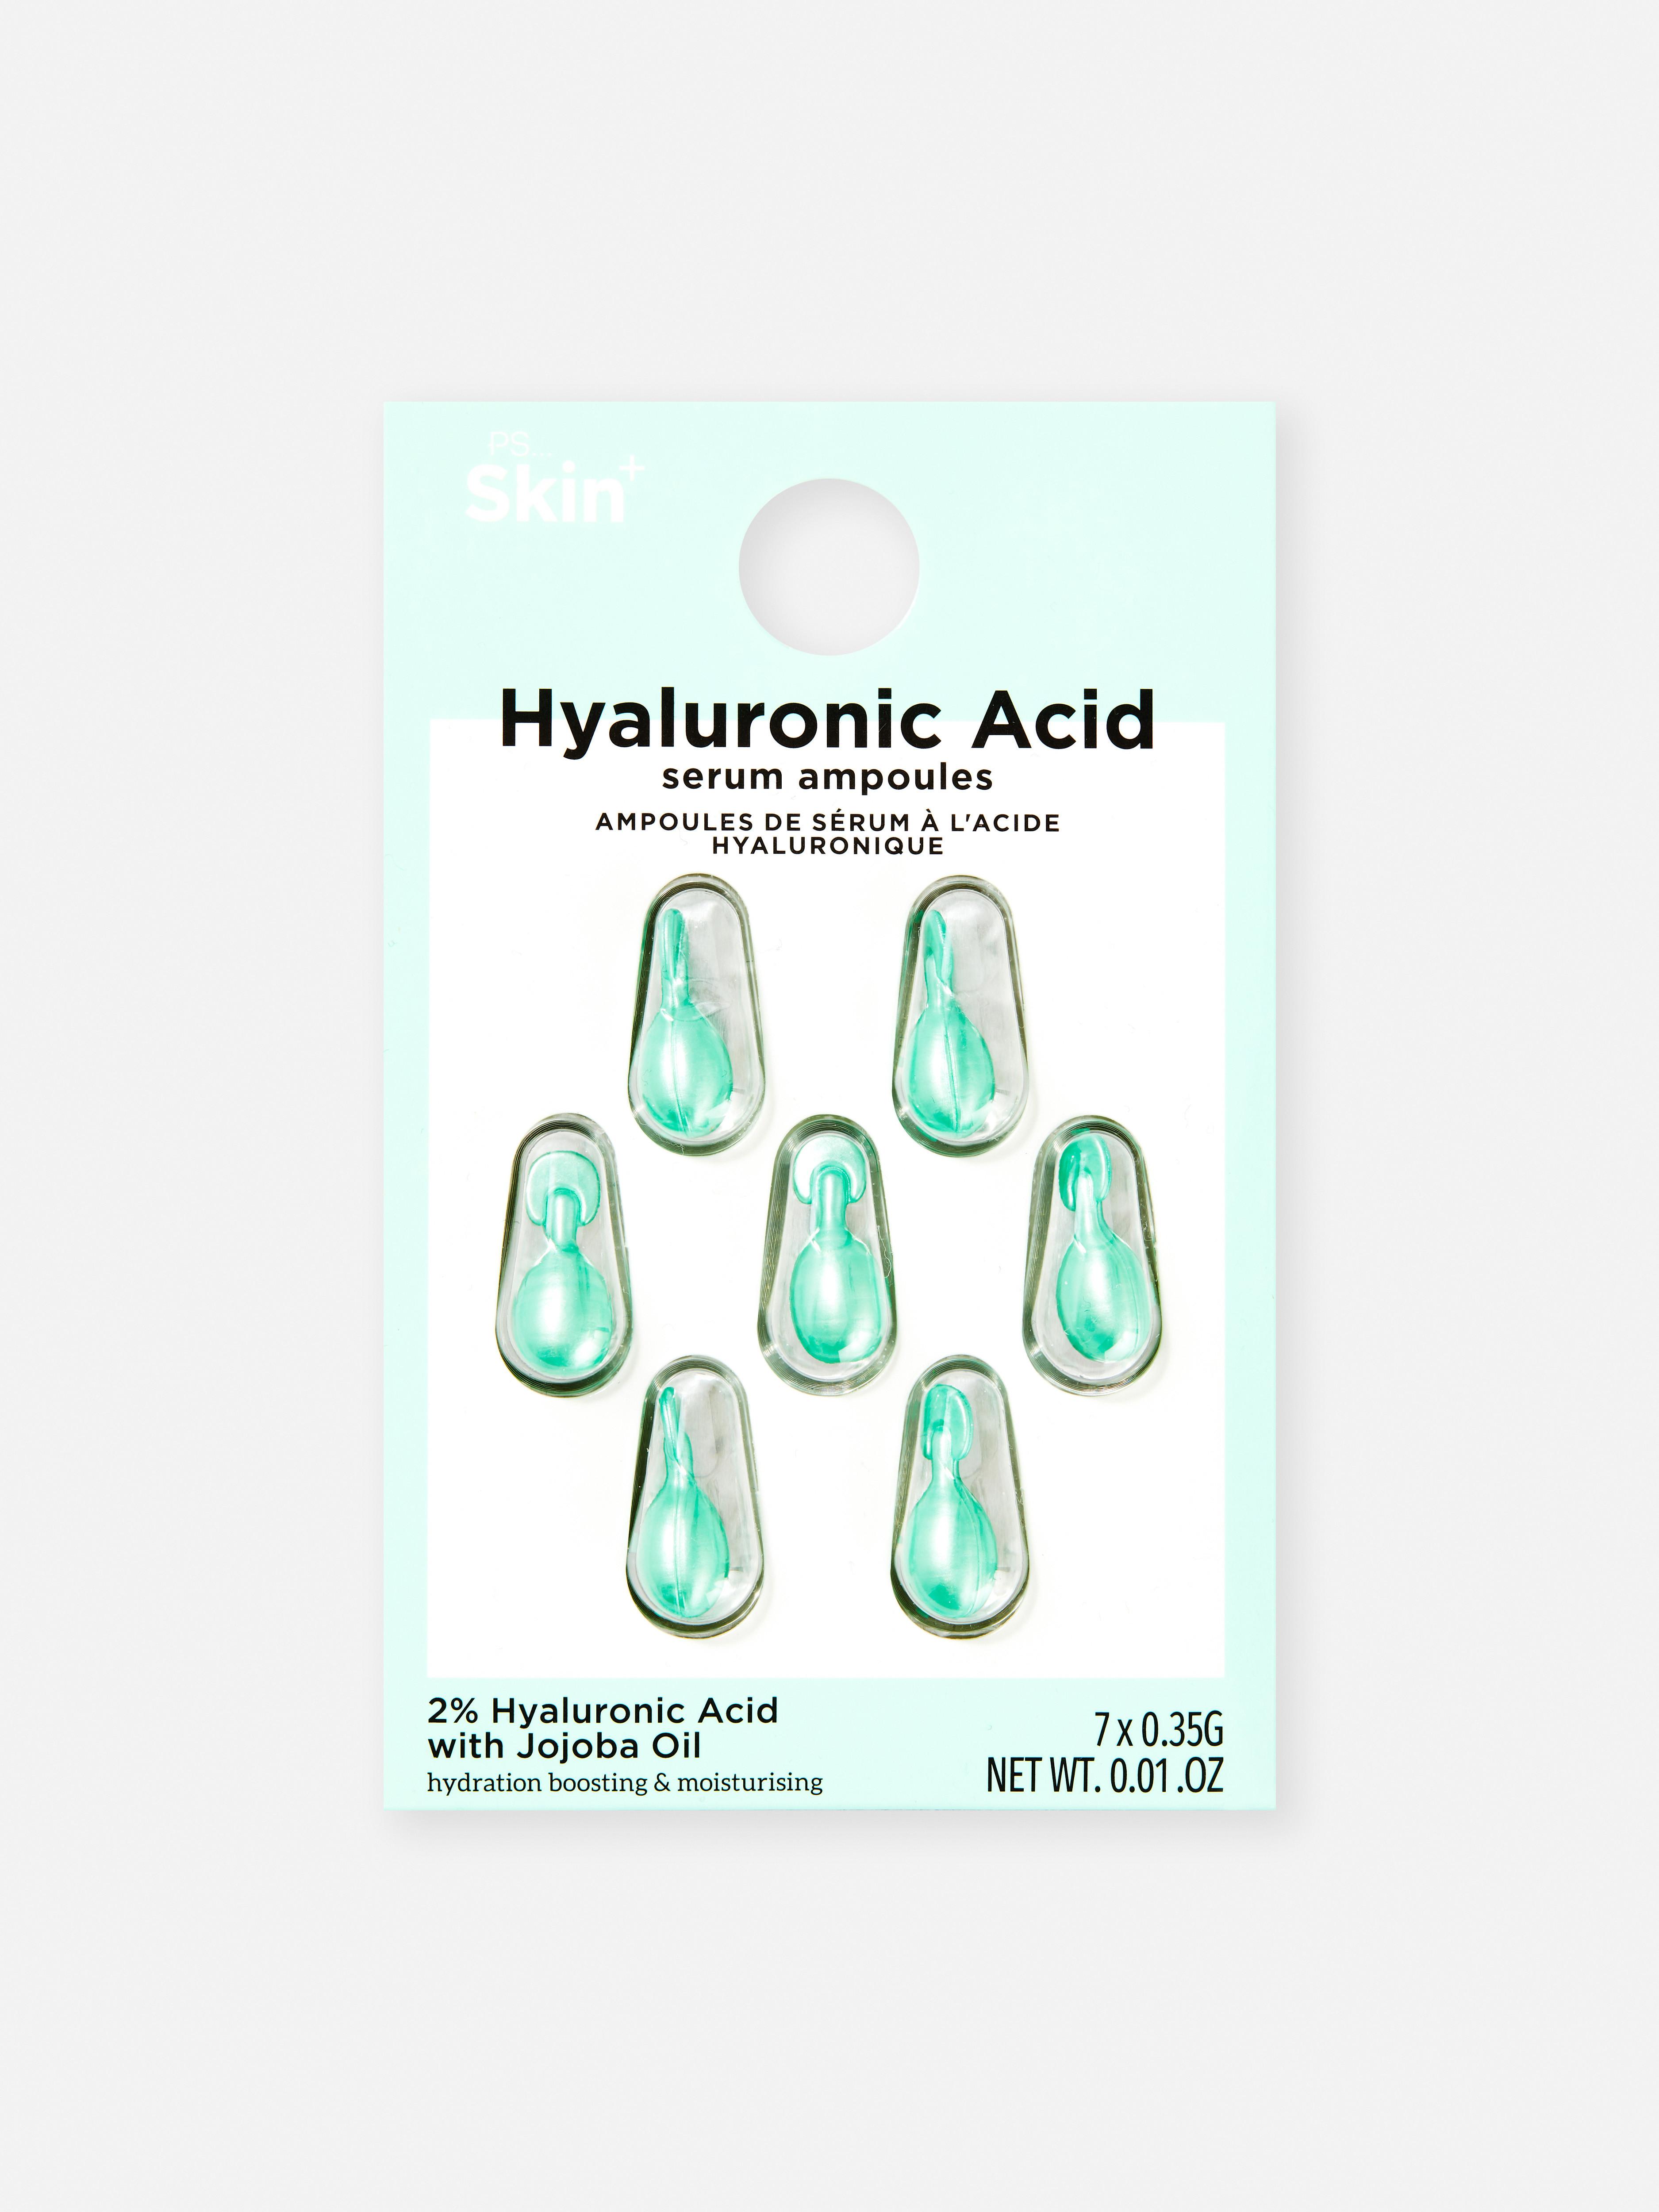 PS… Hyaluronic Acid Serum Ampoules